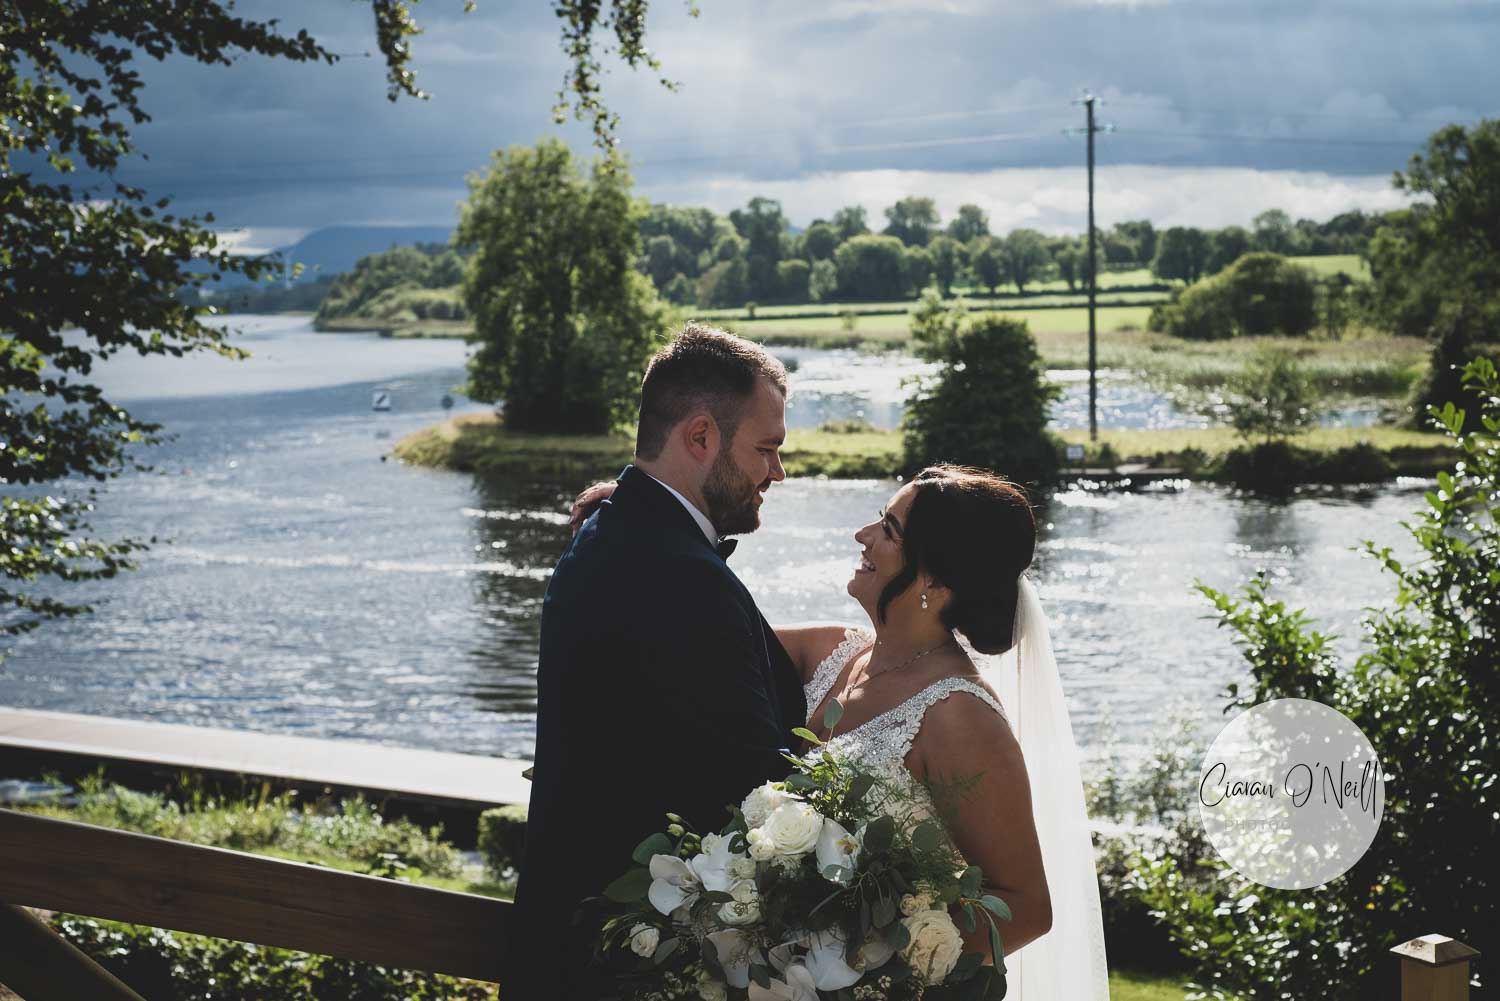 Bride and groom embracing in front of a sunlit lake at the Killyhevlin Hotel